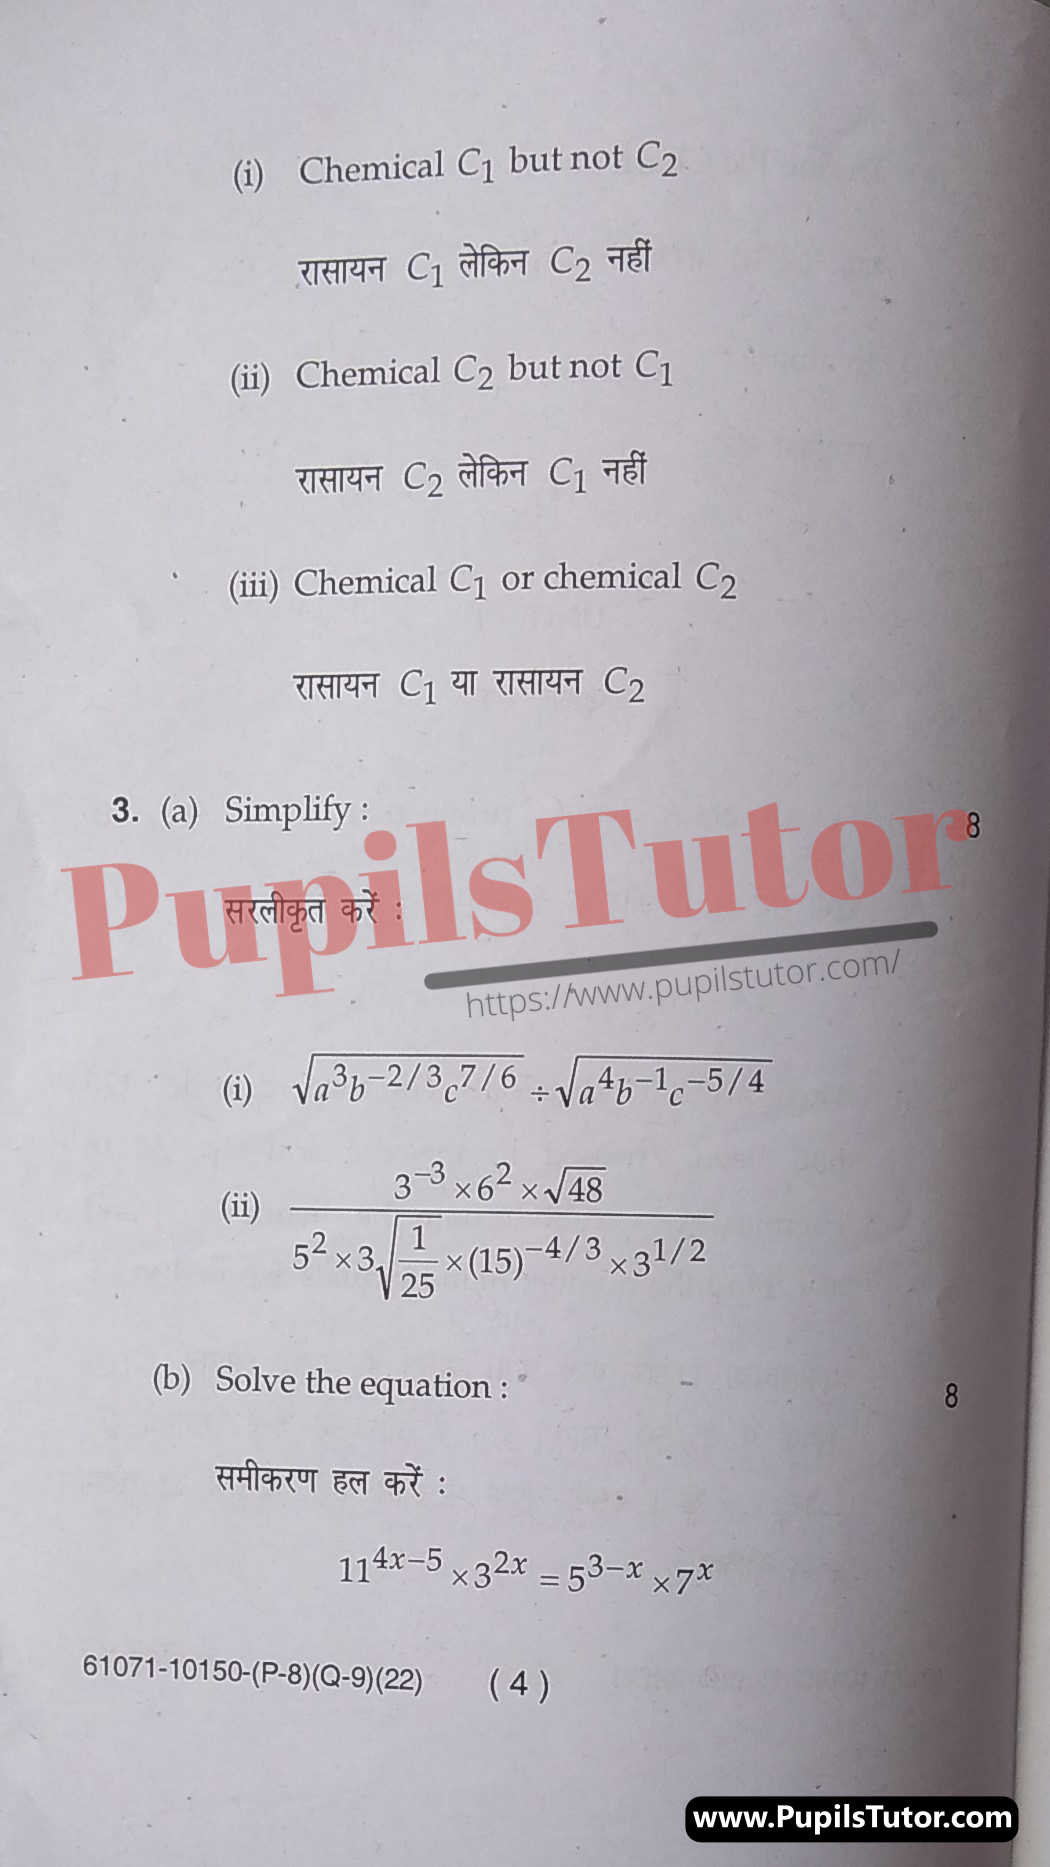 MDU (Maharshi Dayanand University, Rohtak Haryana) Pass Course (B.Com. – Bachelor of Commerce) Business Mathematics Important Questions Of February, 2022 Exam PDF Download Free (Page 4)